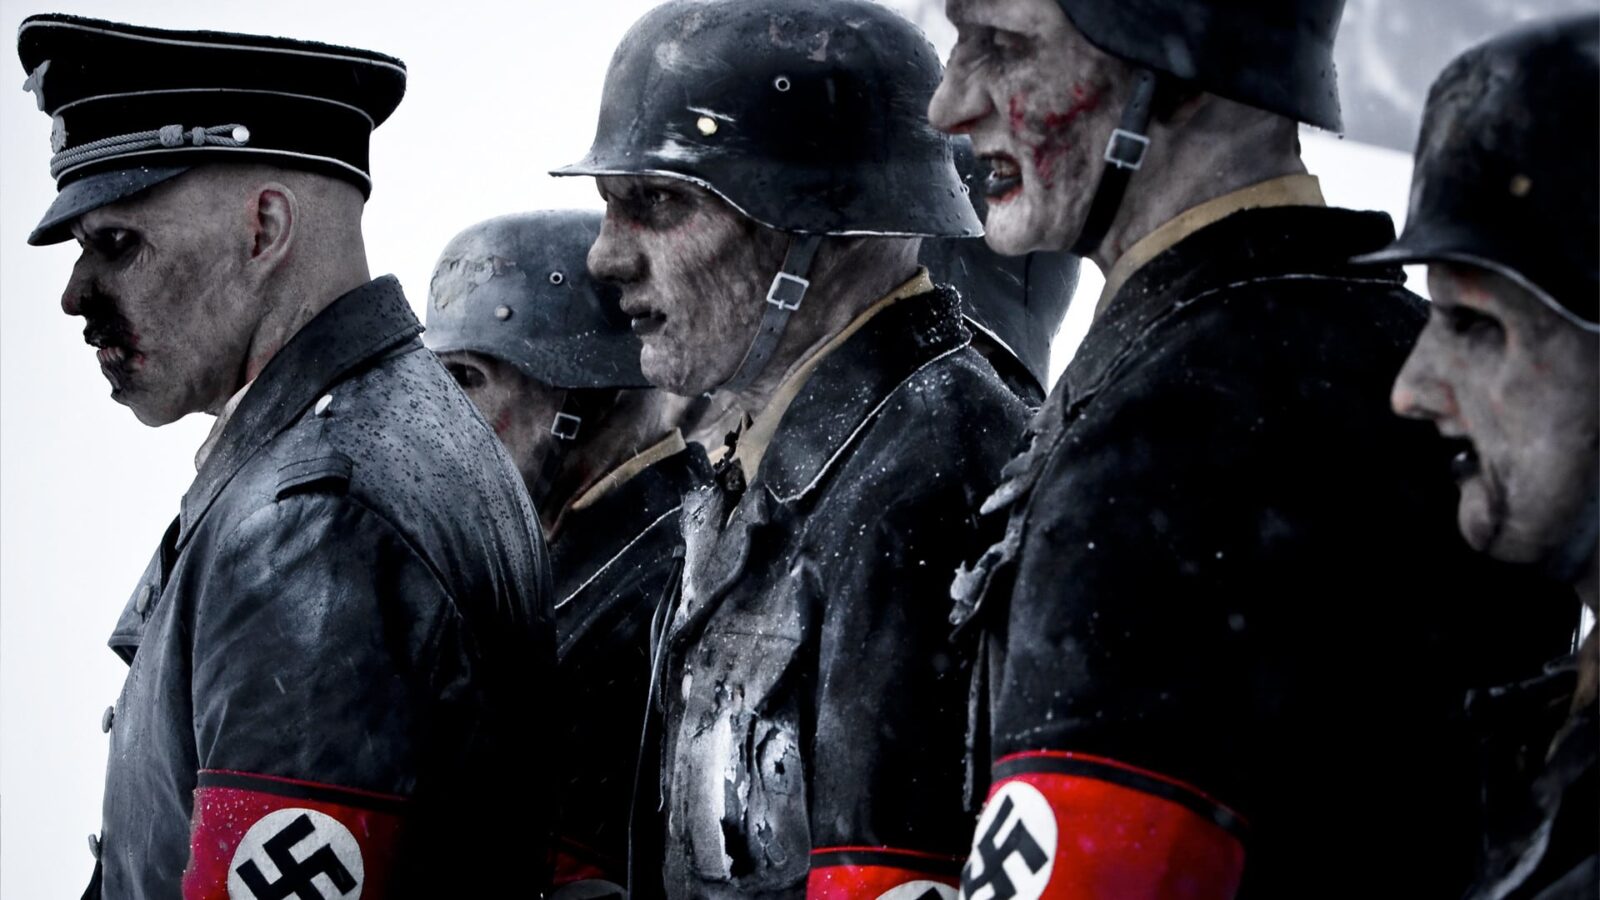 Image from the movie "Dead Snow"